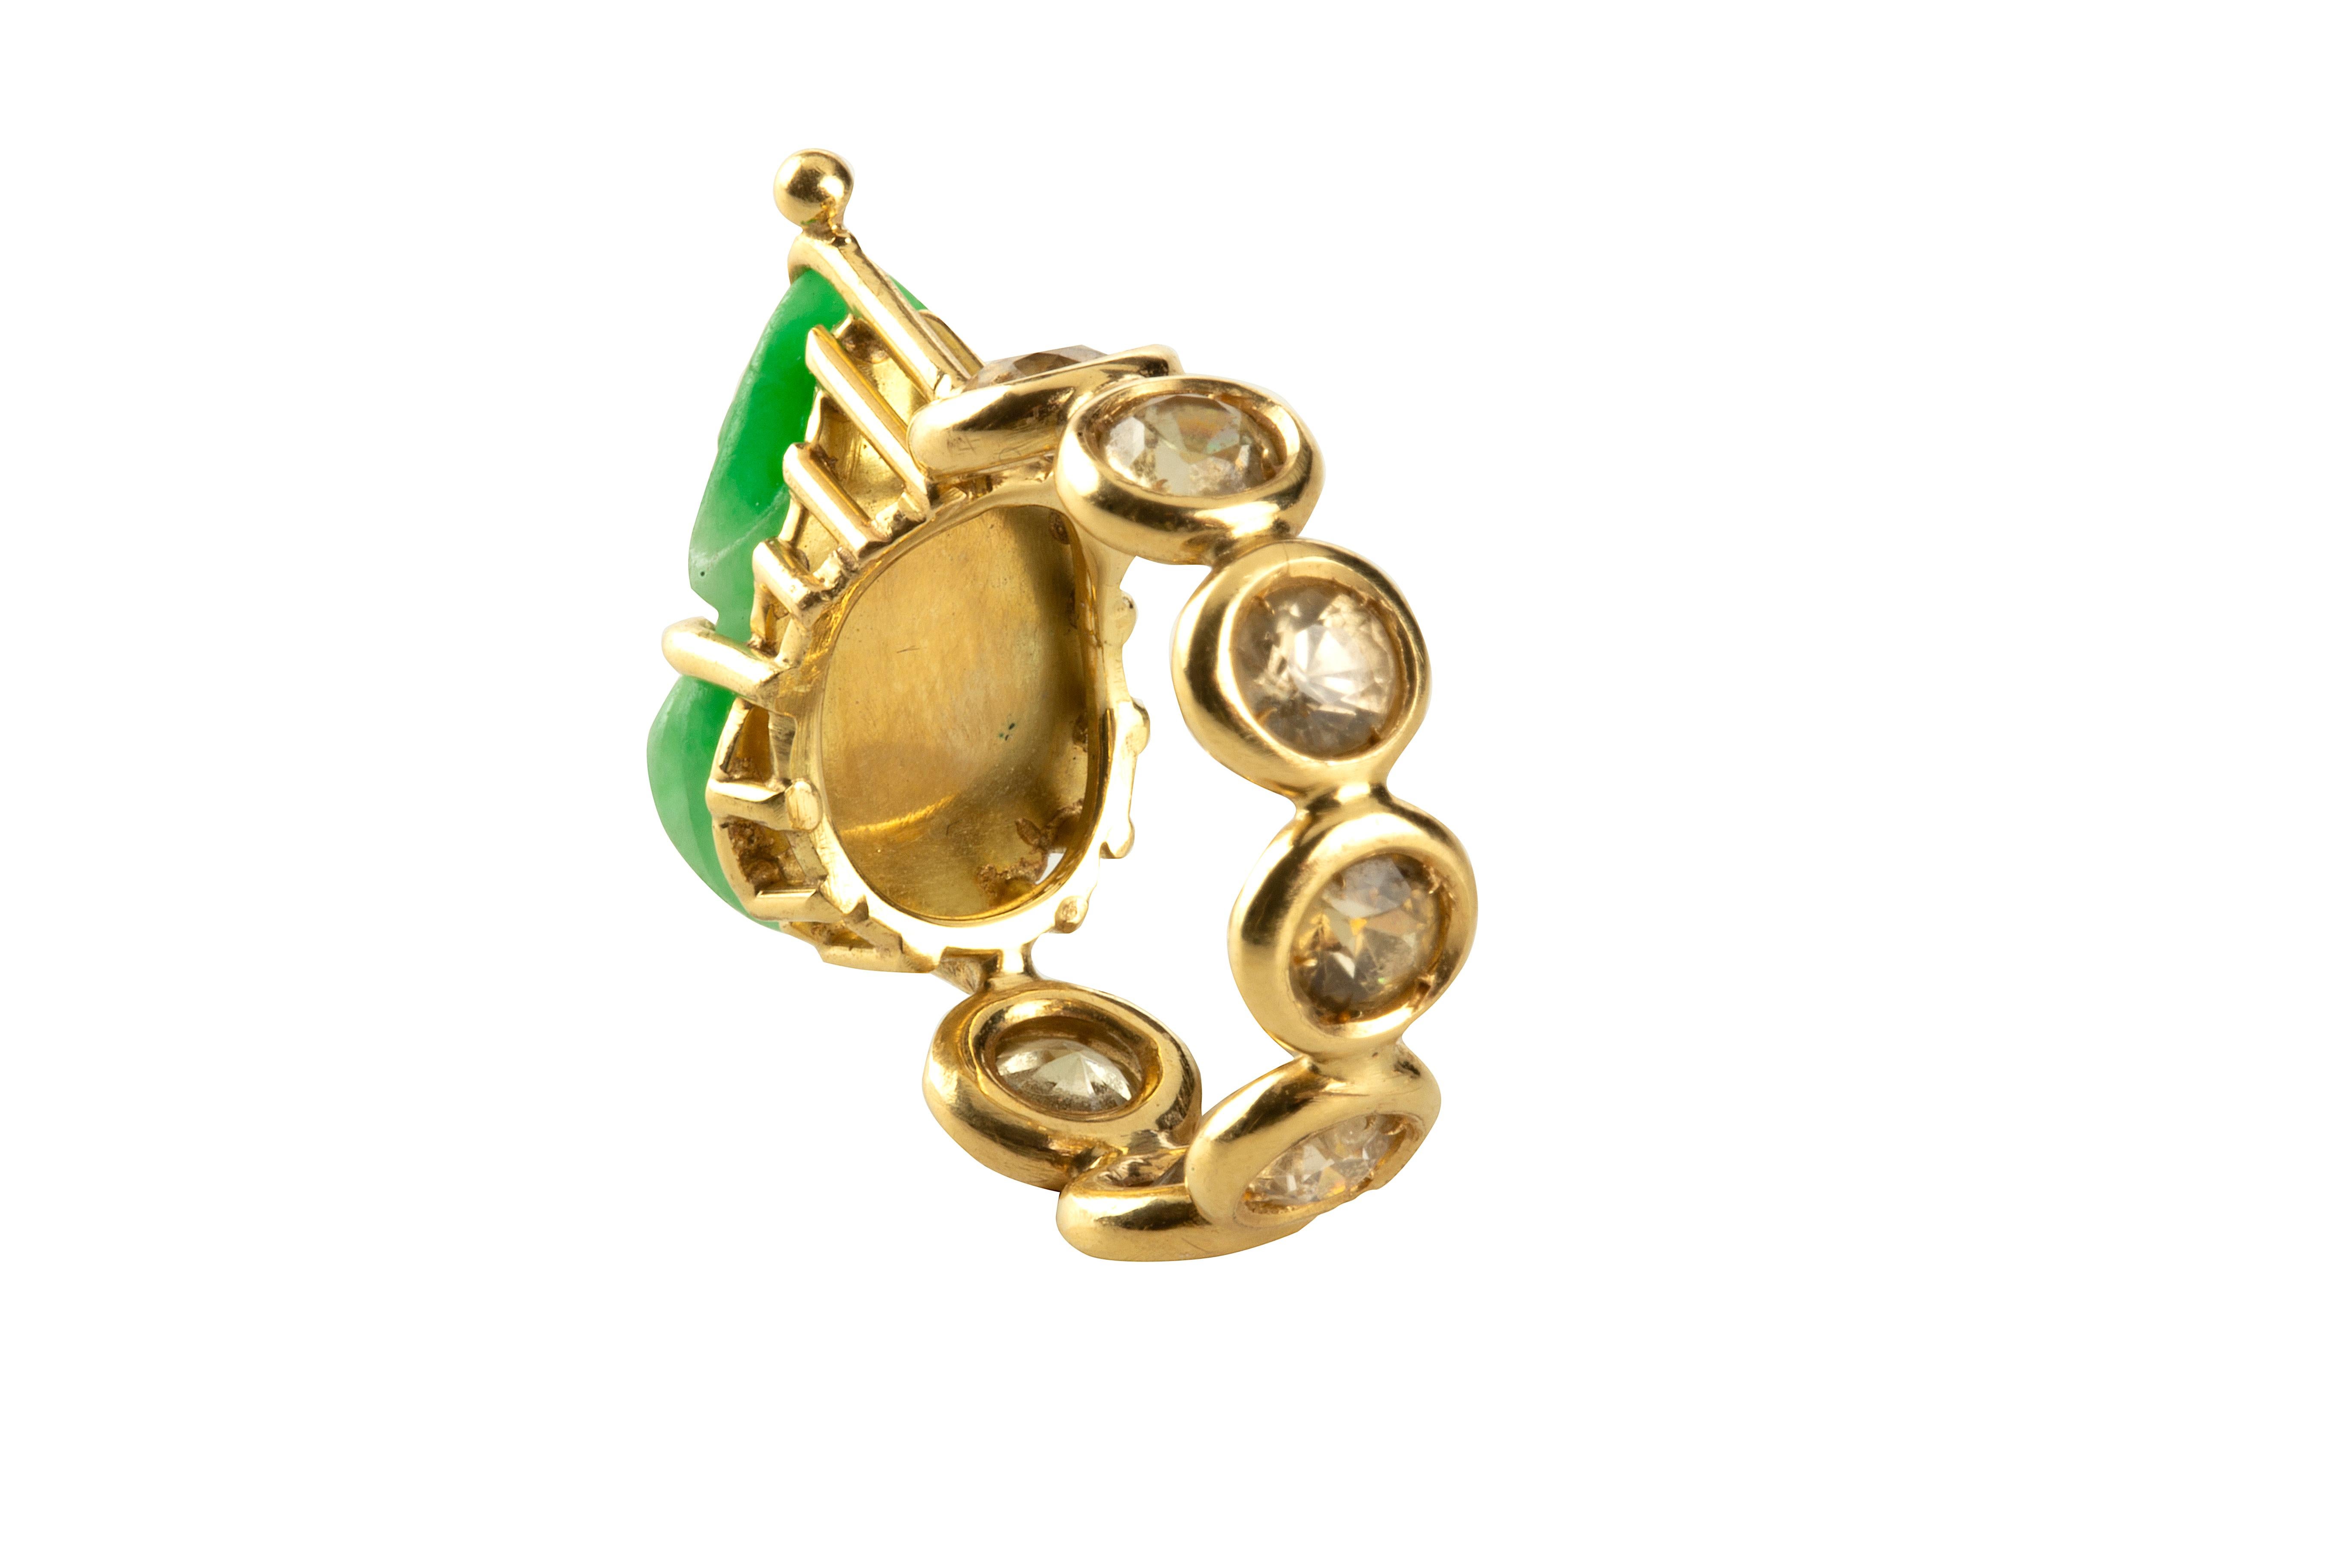 18kt Gold  gr. 10,13 Ring Citrine Antiques Carved Frog Jade. Measure 13 eu.
All Giulia Colussi jewelry is new and has never been previously owned or worn. Each item will arrive at your door beautifully gift wrapped in our boxes, put inside an